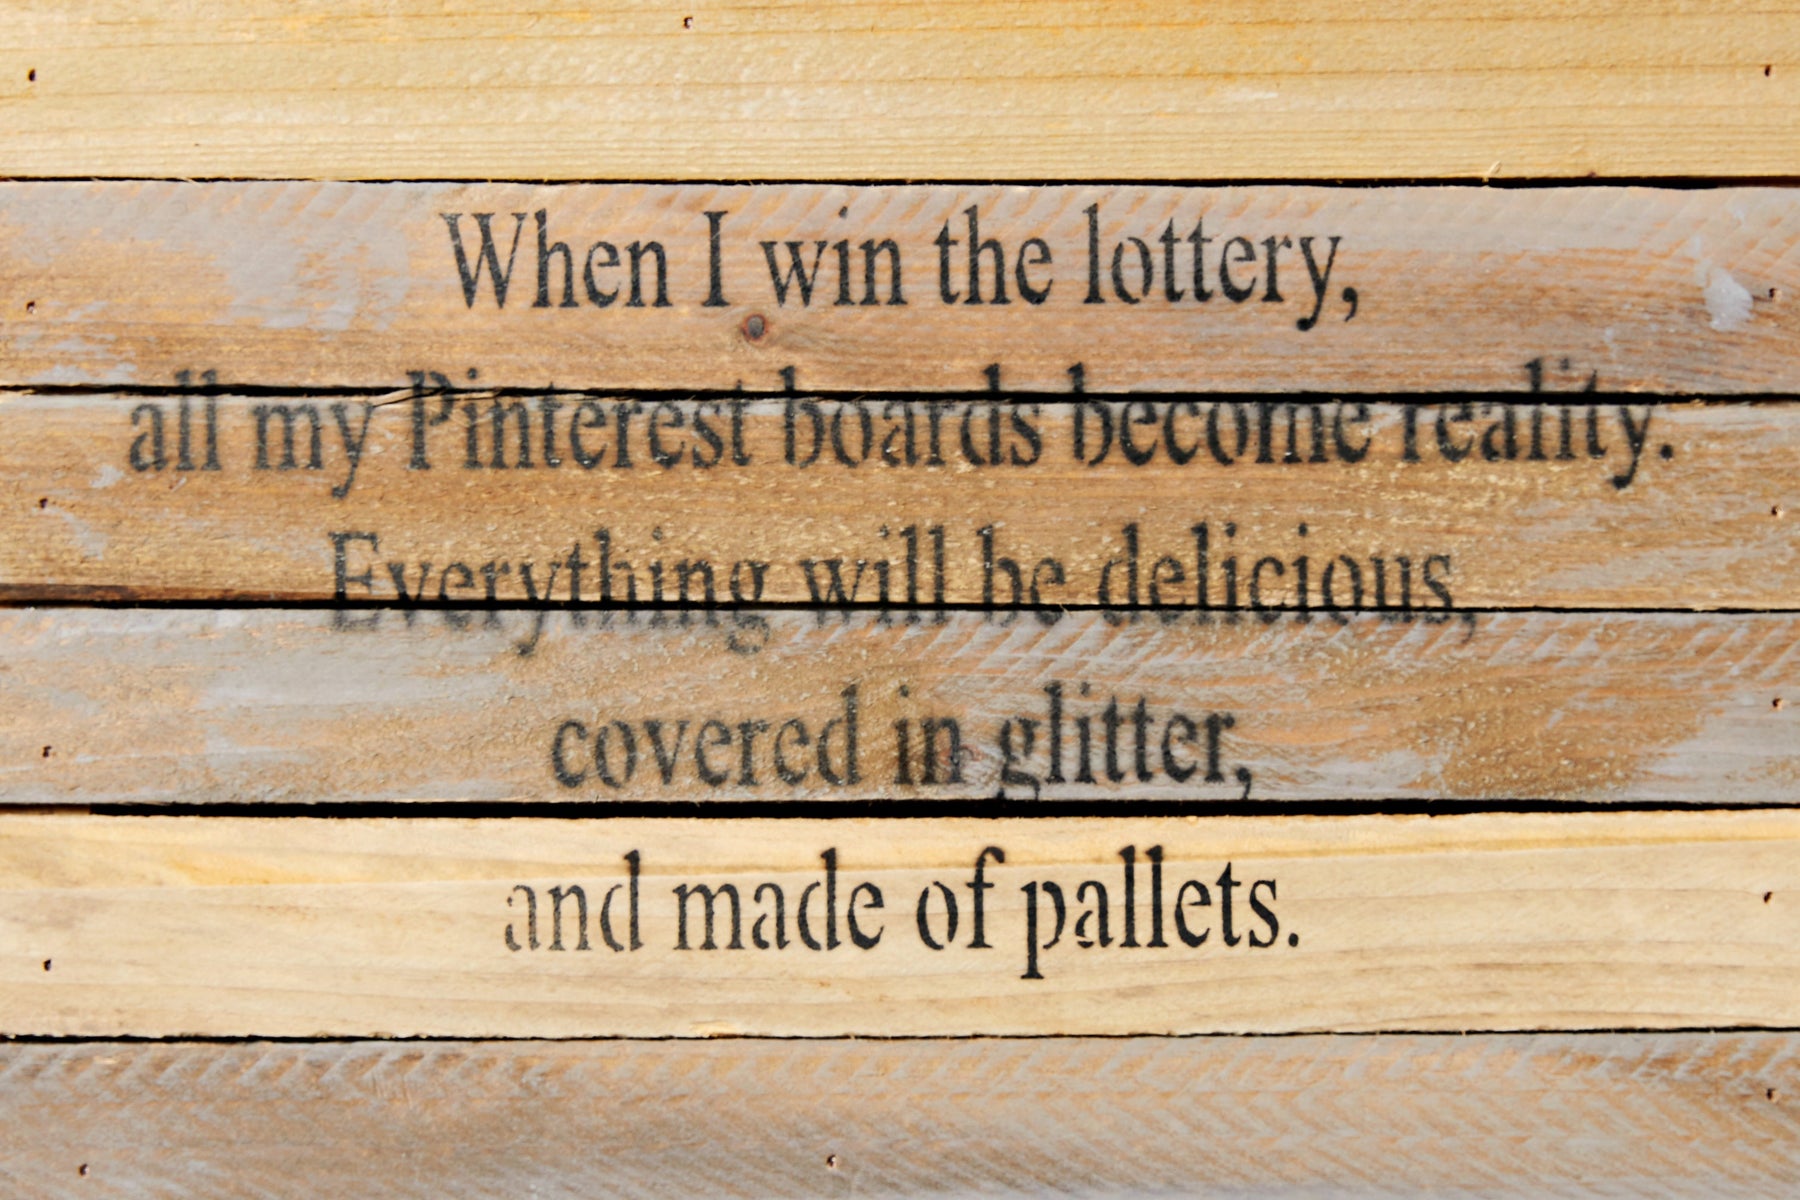 When I win the lottery, all my Pinterest boards become reality. Everything will be delicious, covered in glitter, and made of pallets. / 12x8 Reclaimed Wood Wall Art